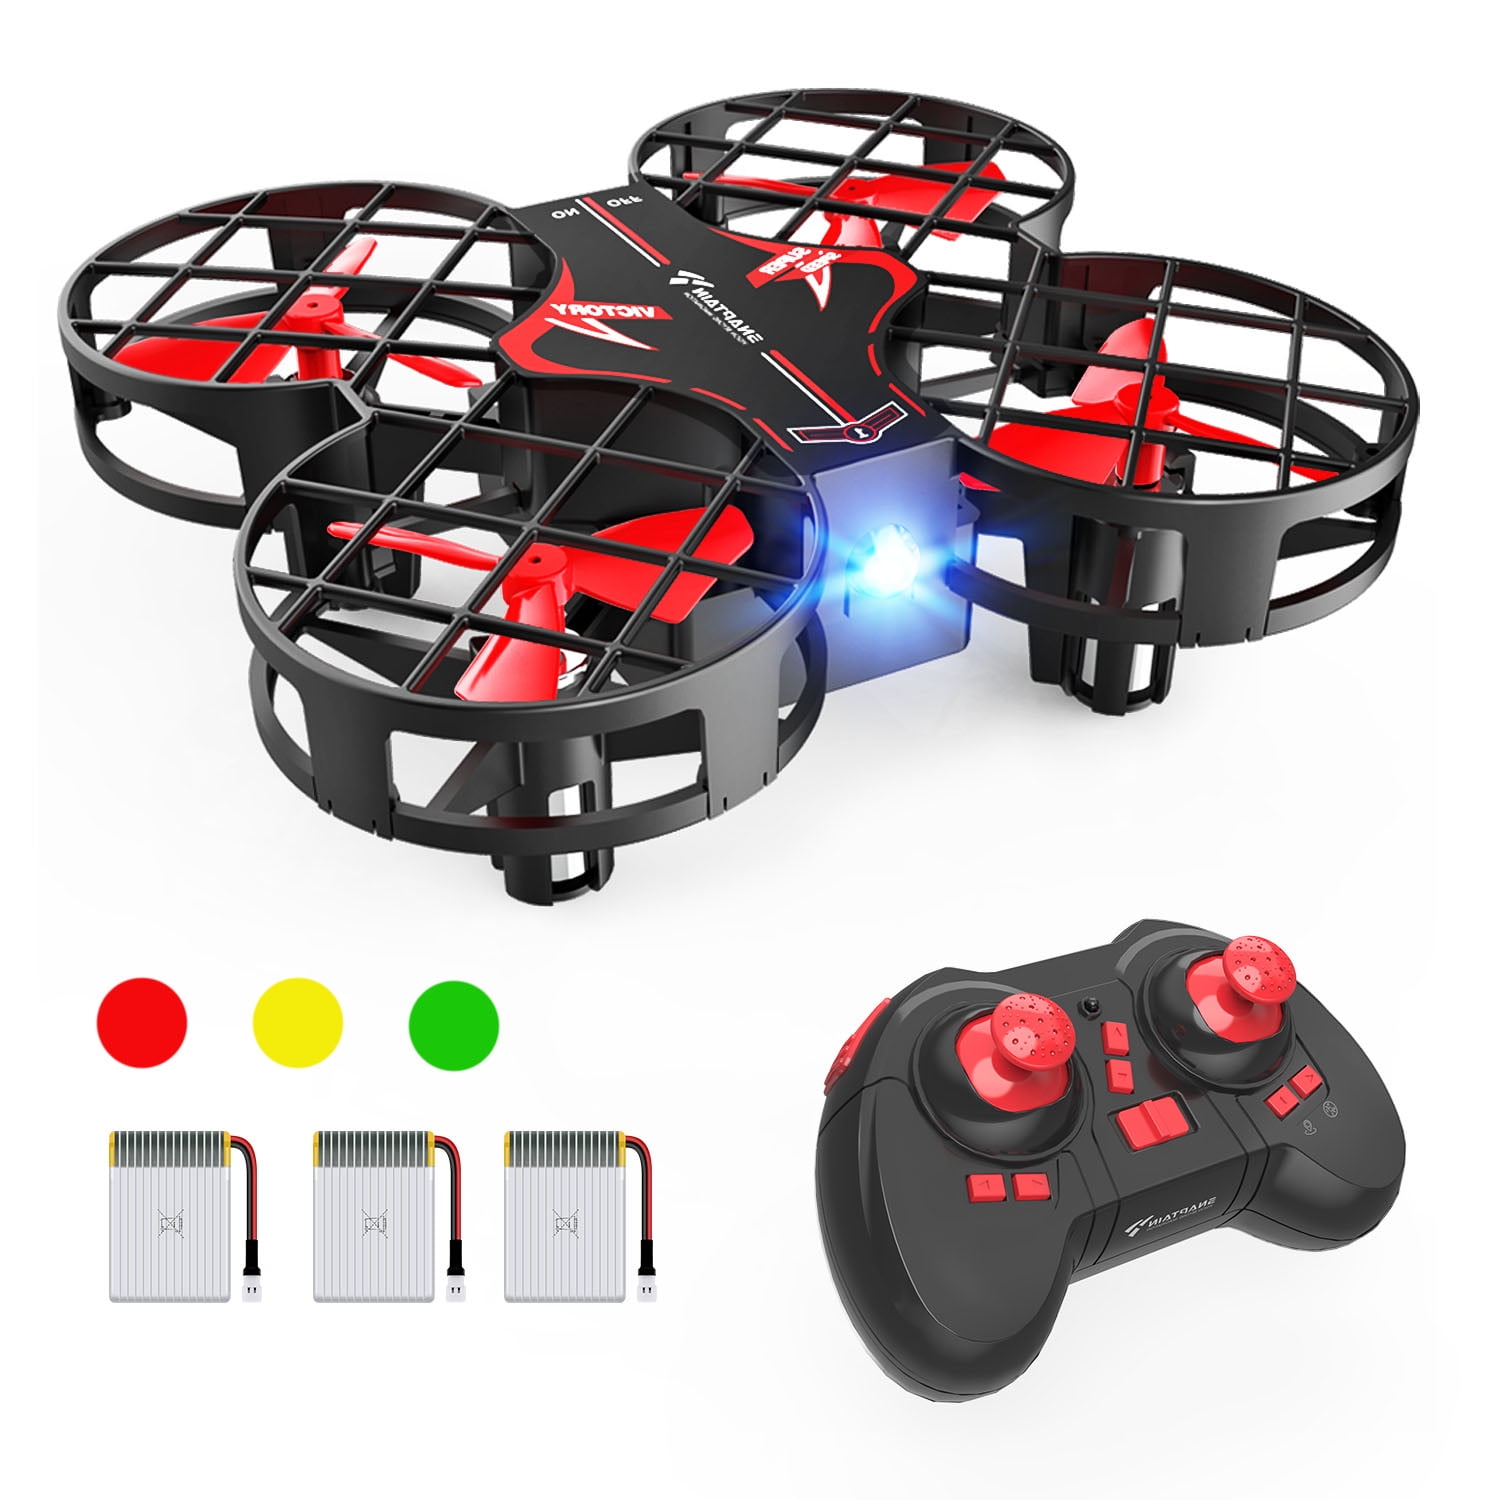 Details about   UFO 4000 LED Mini Drone for Kids Remote Control Drone Small RC Quadcop 